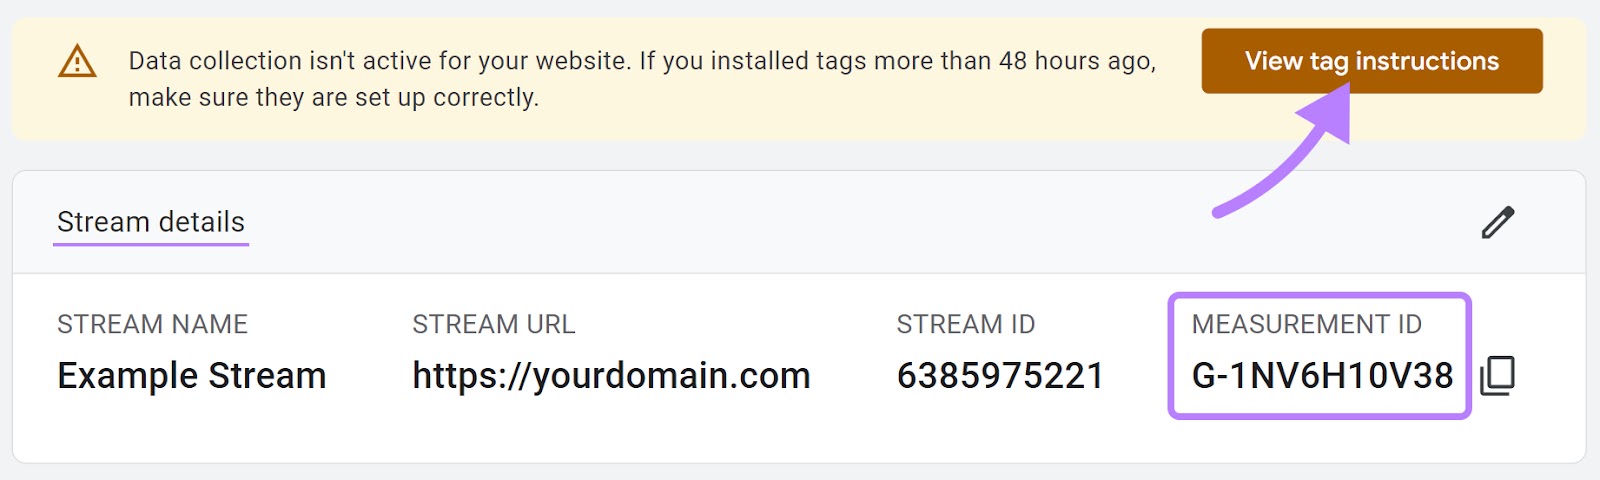 “Stream details” page with “Measurement ID" highlighted